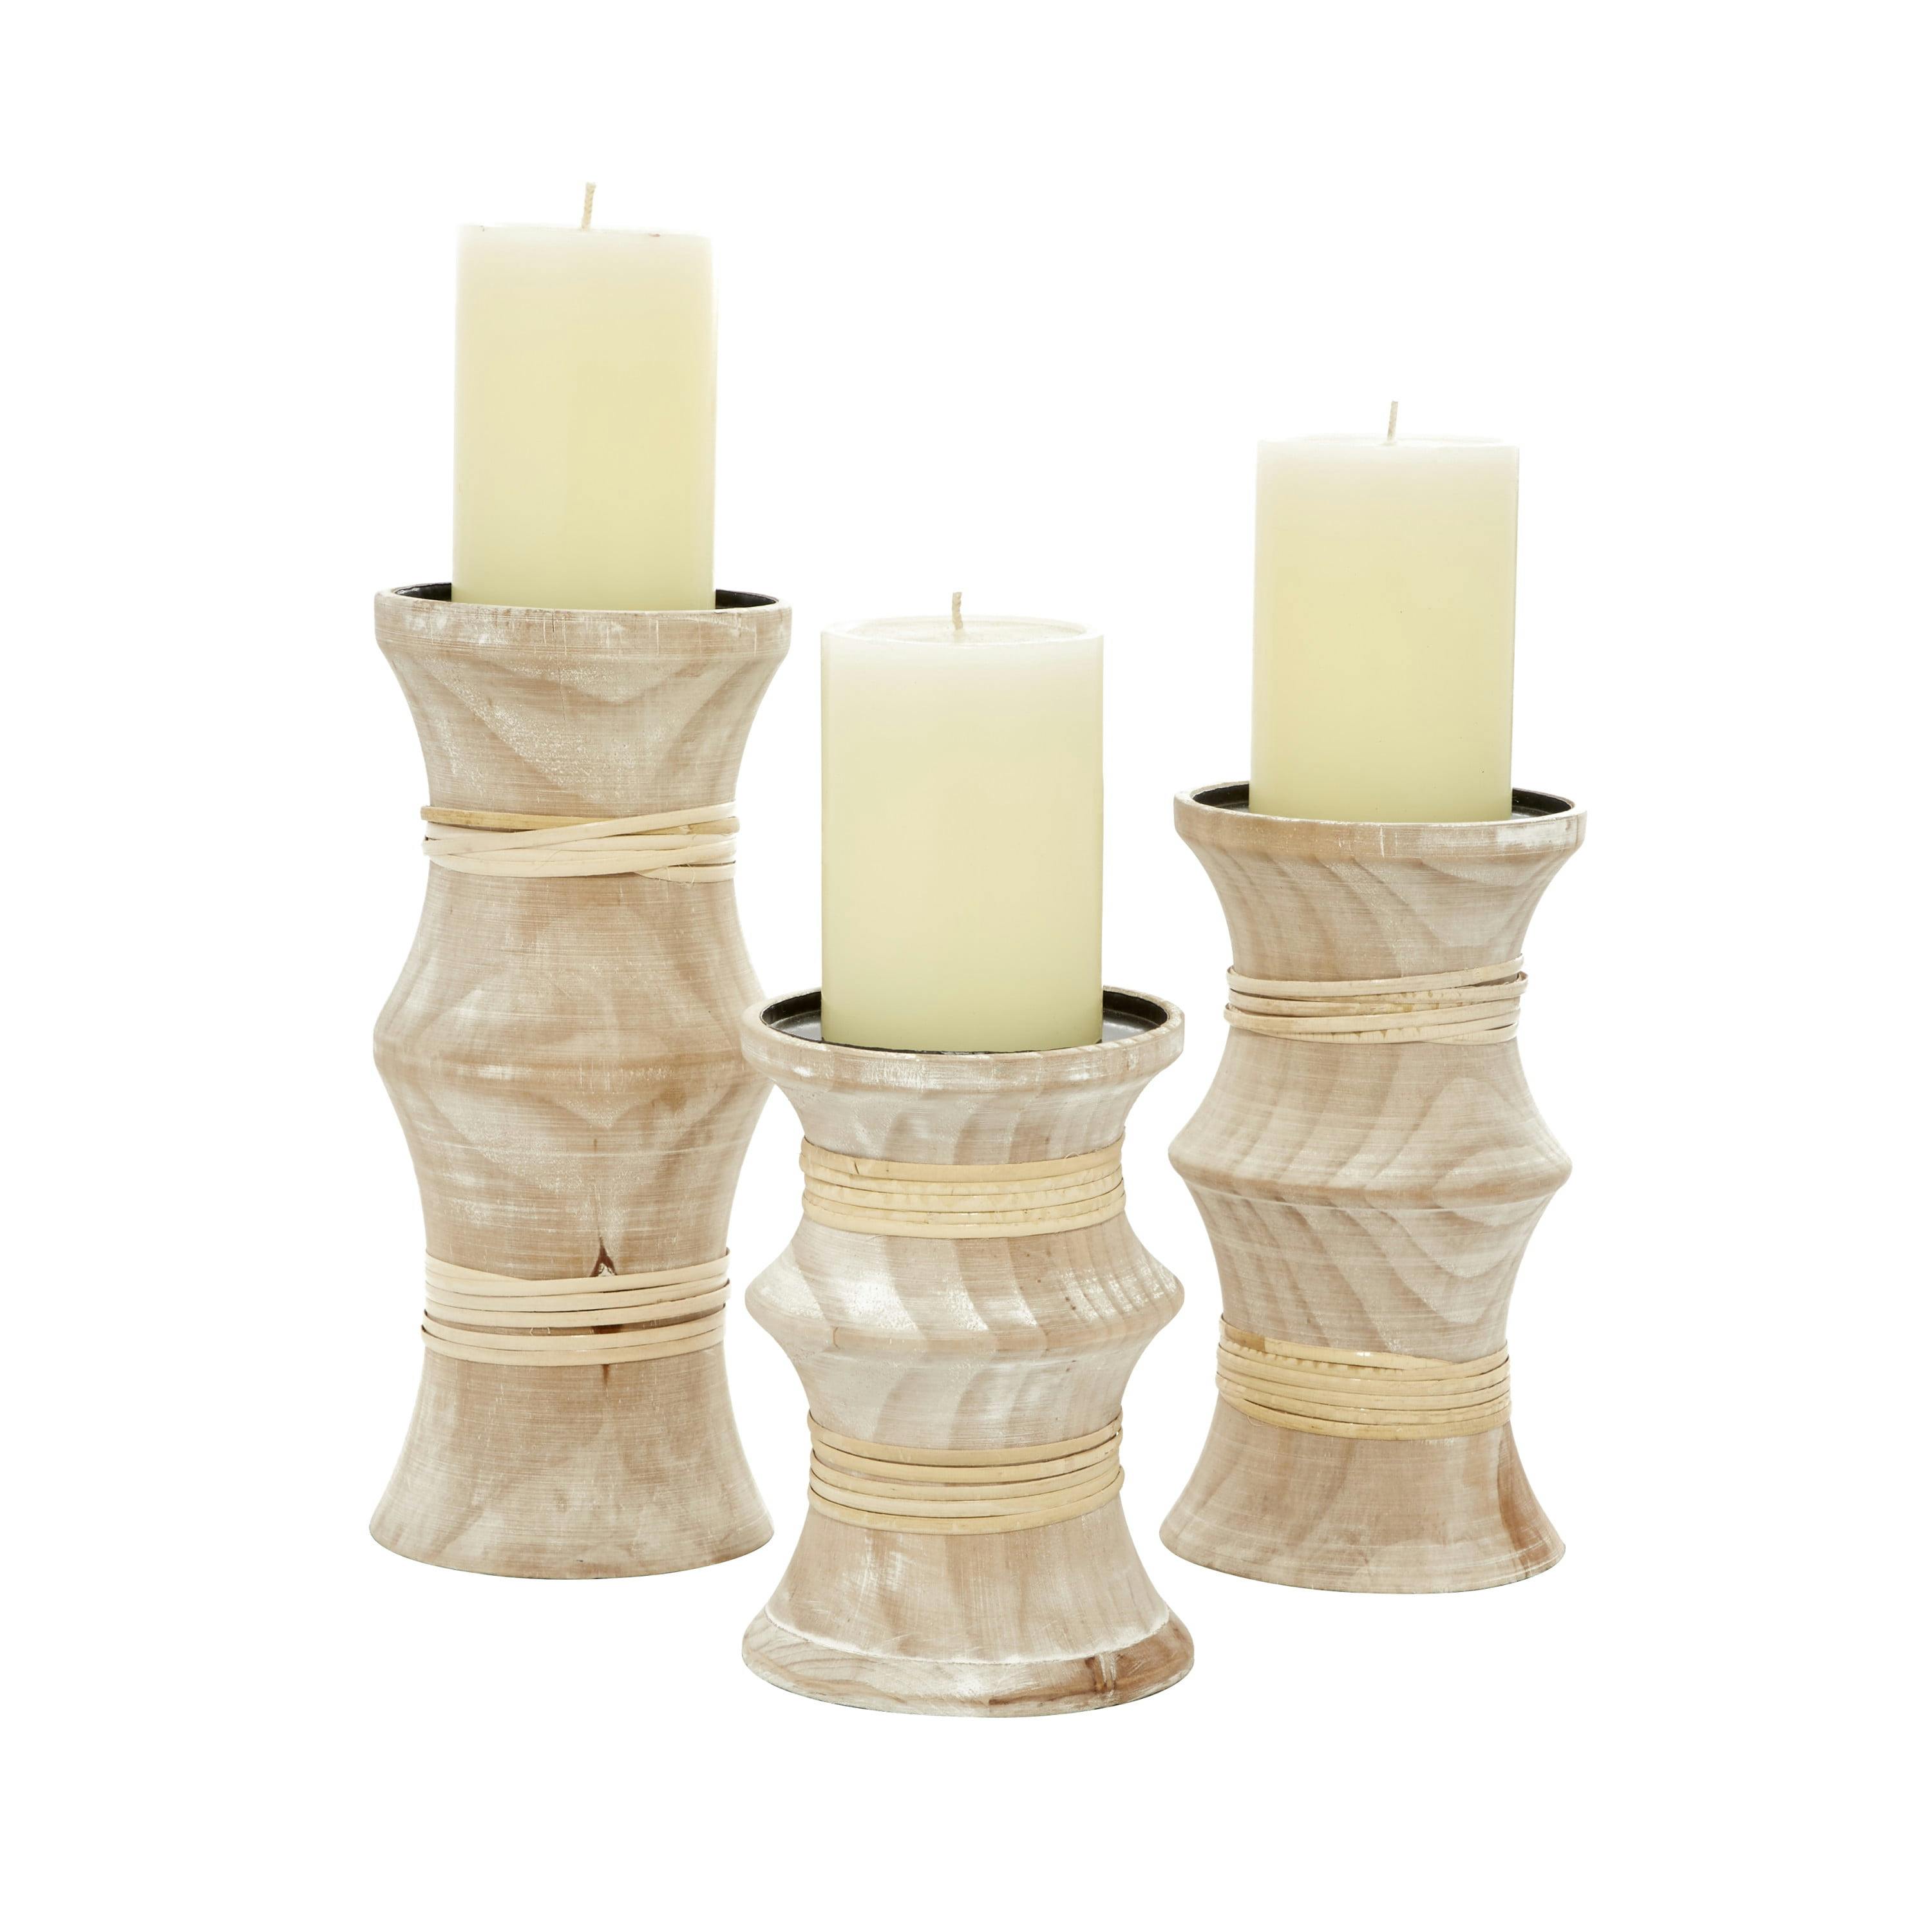 Rustic Whitewashed Wooden Candlestick Trio - Brown, Set of 3